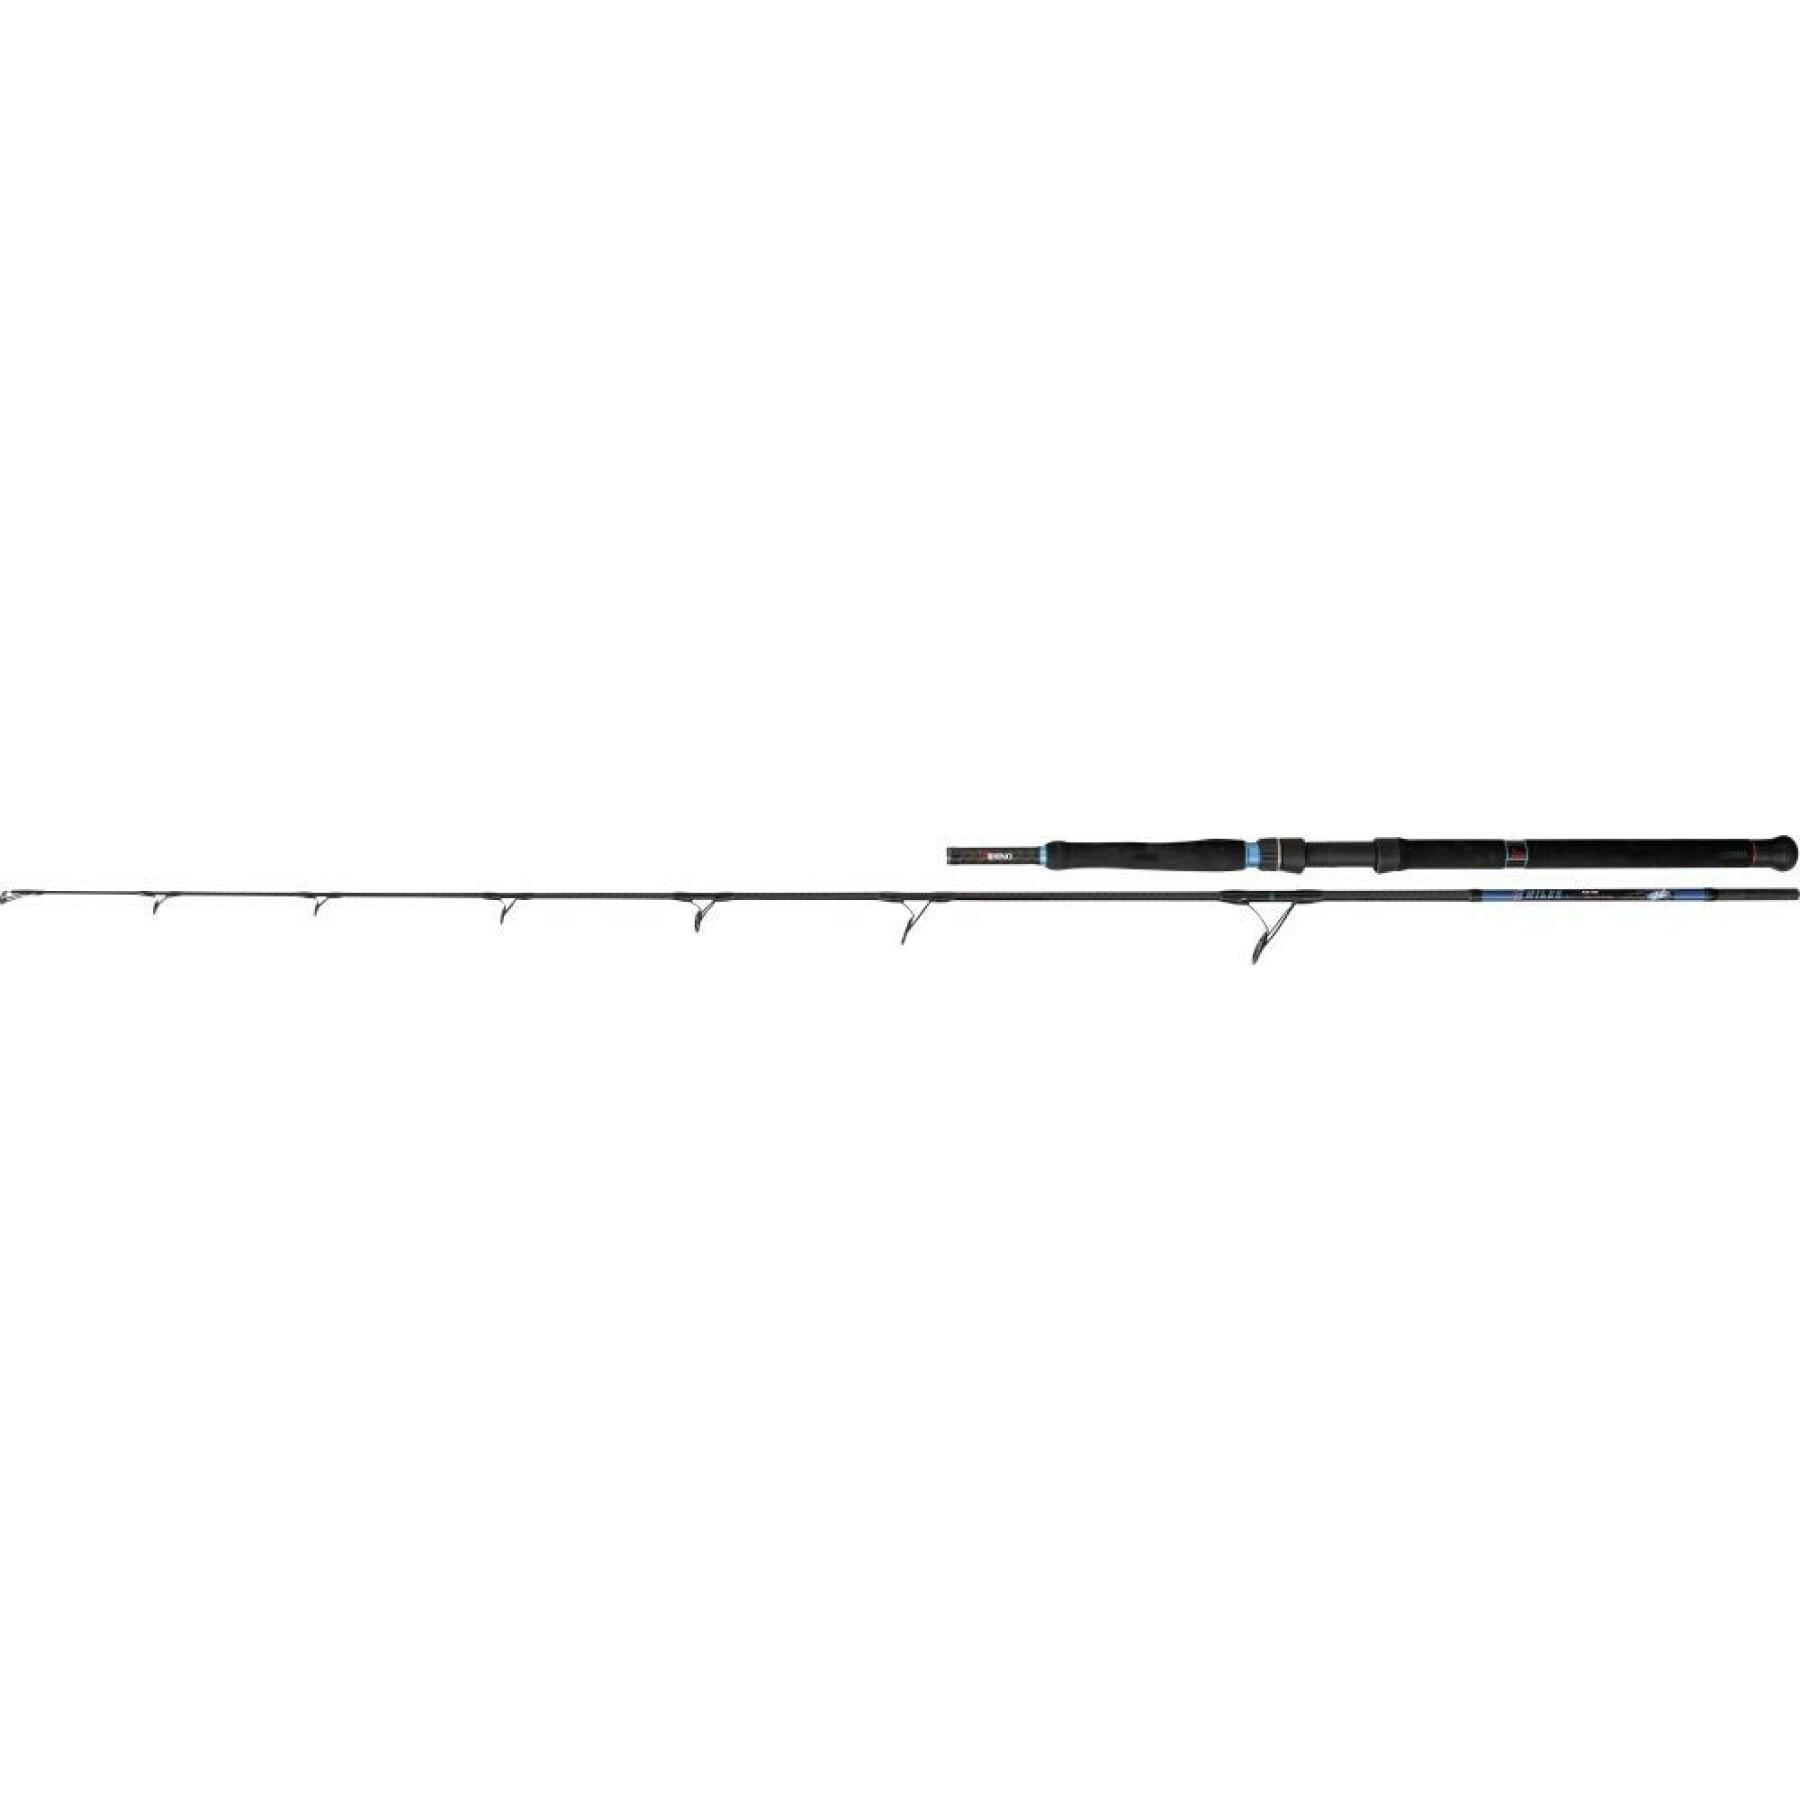 Cana Rhino 8 Miles Out Blue Fish 200-250g